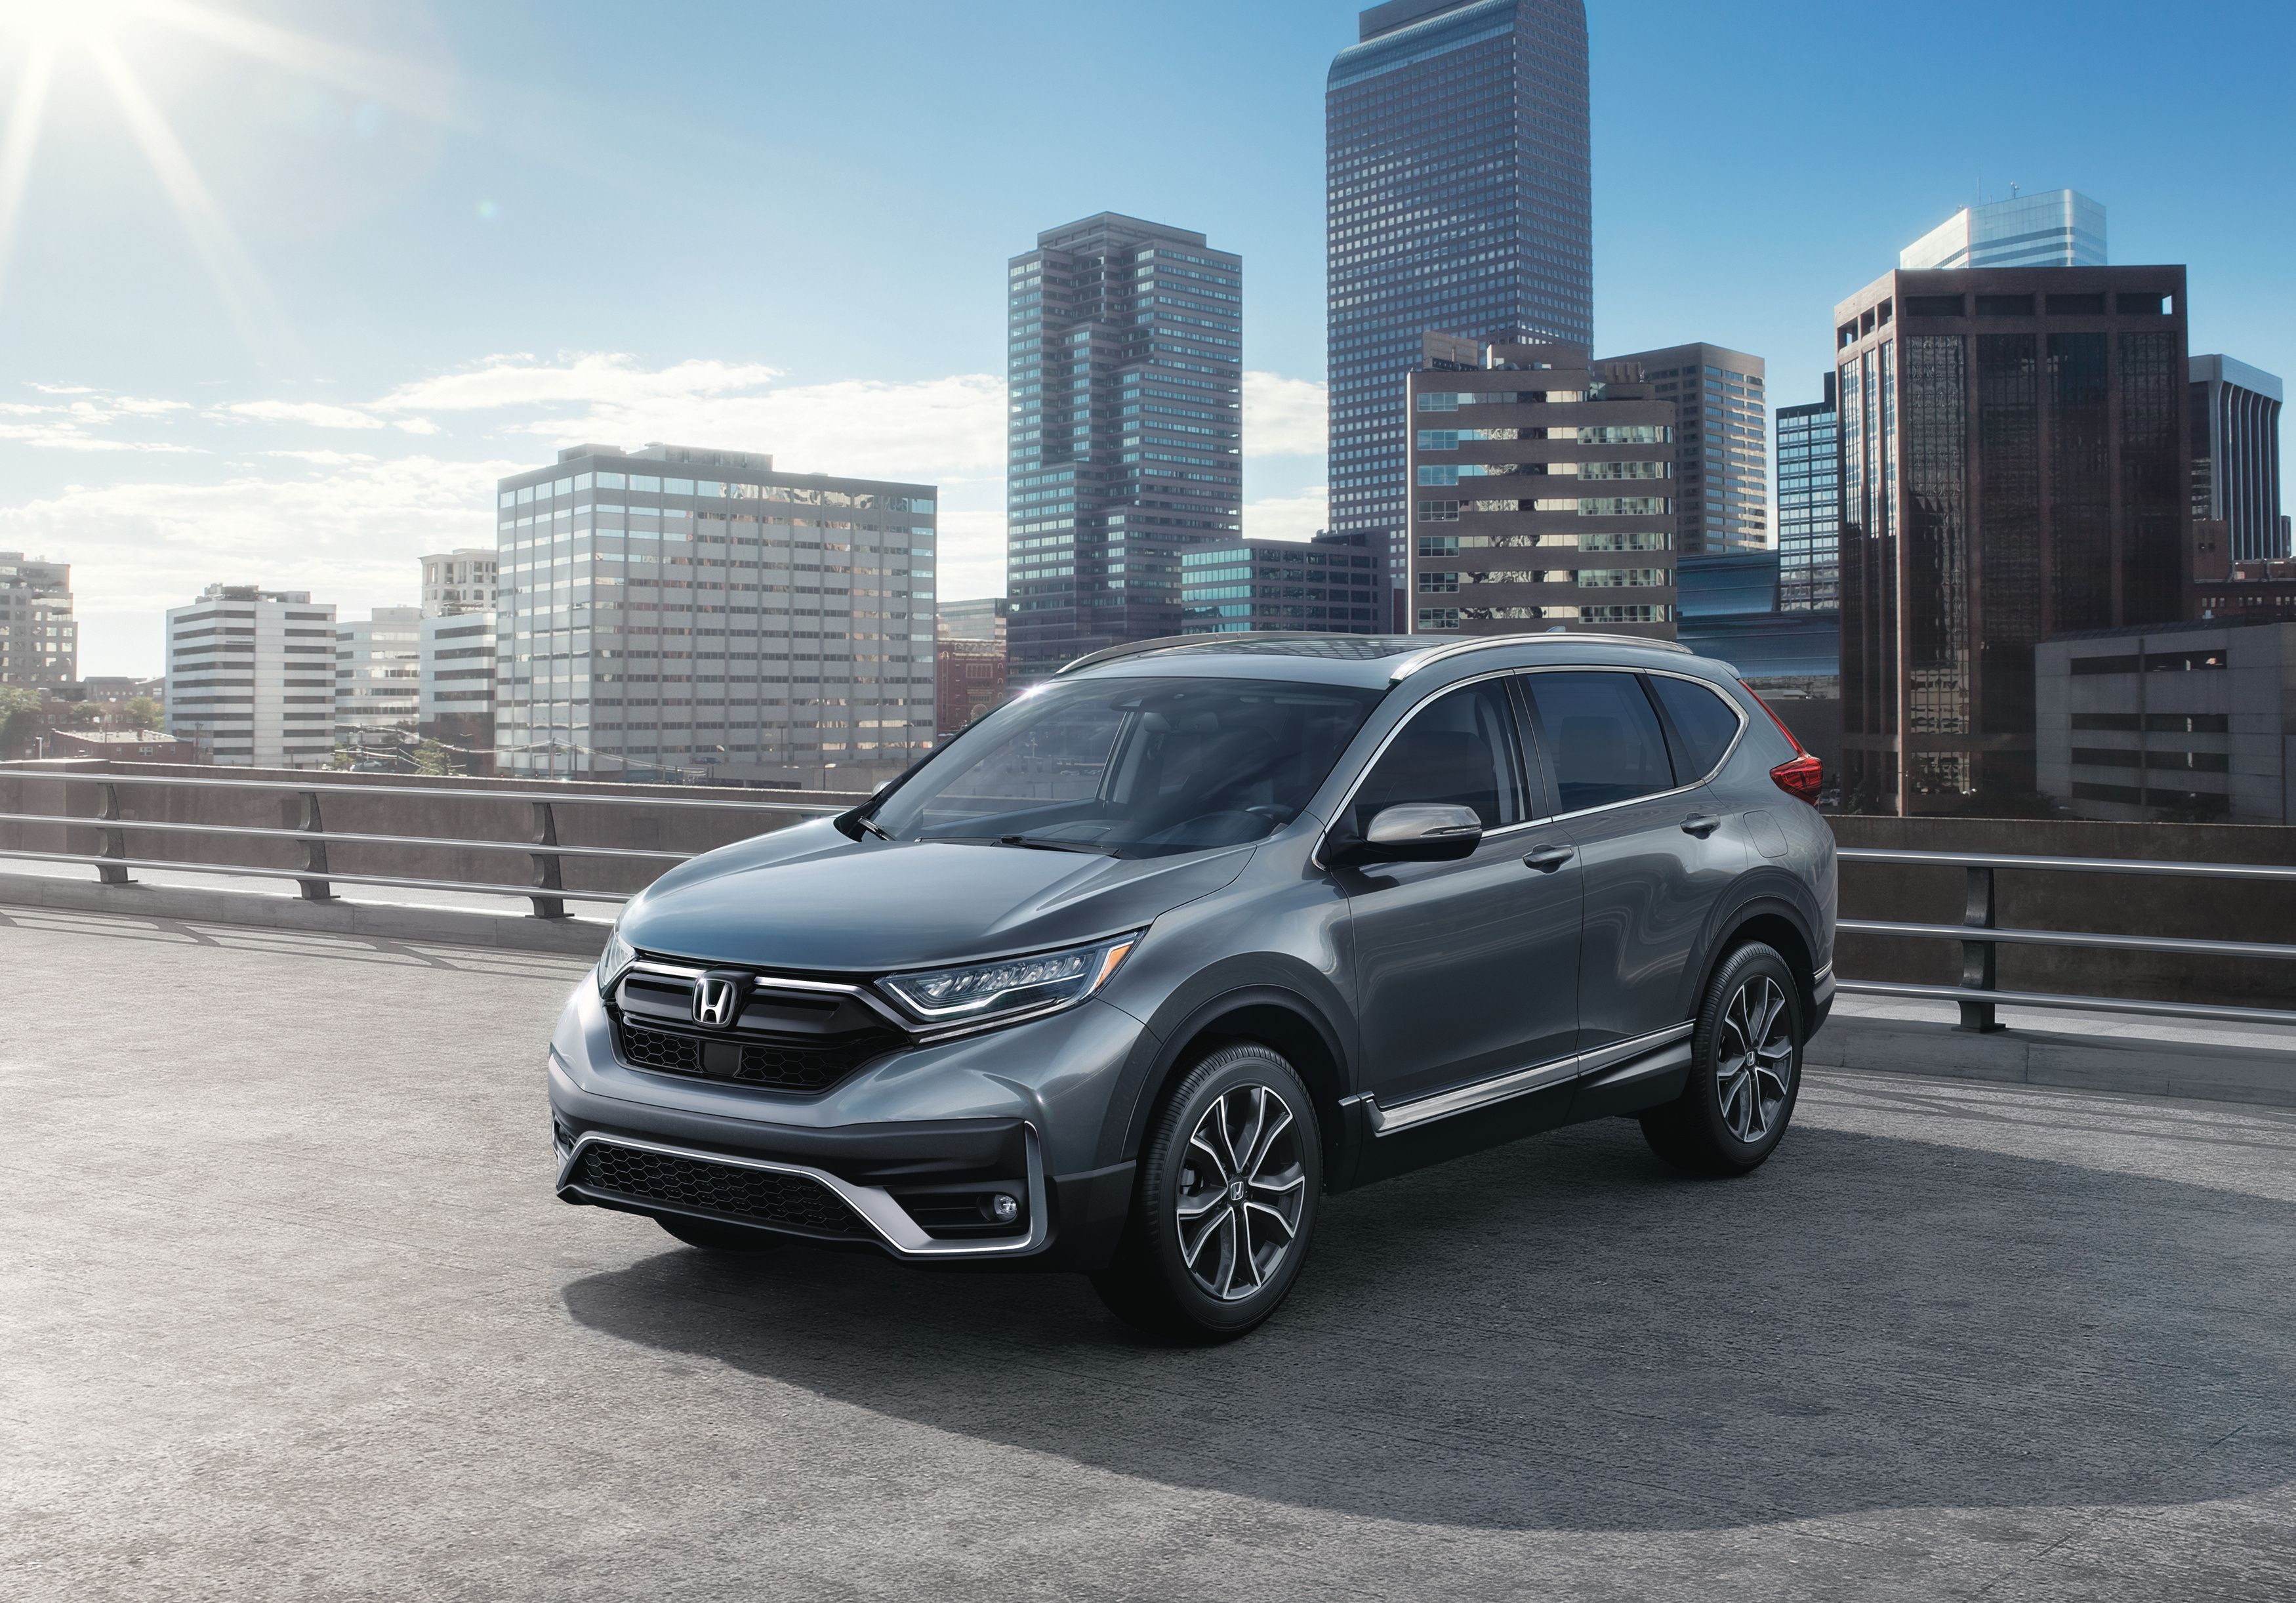 2020 Honda CR-V Touring in silver with a city skyline